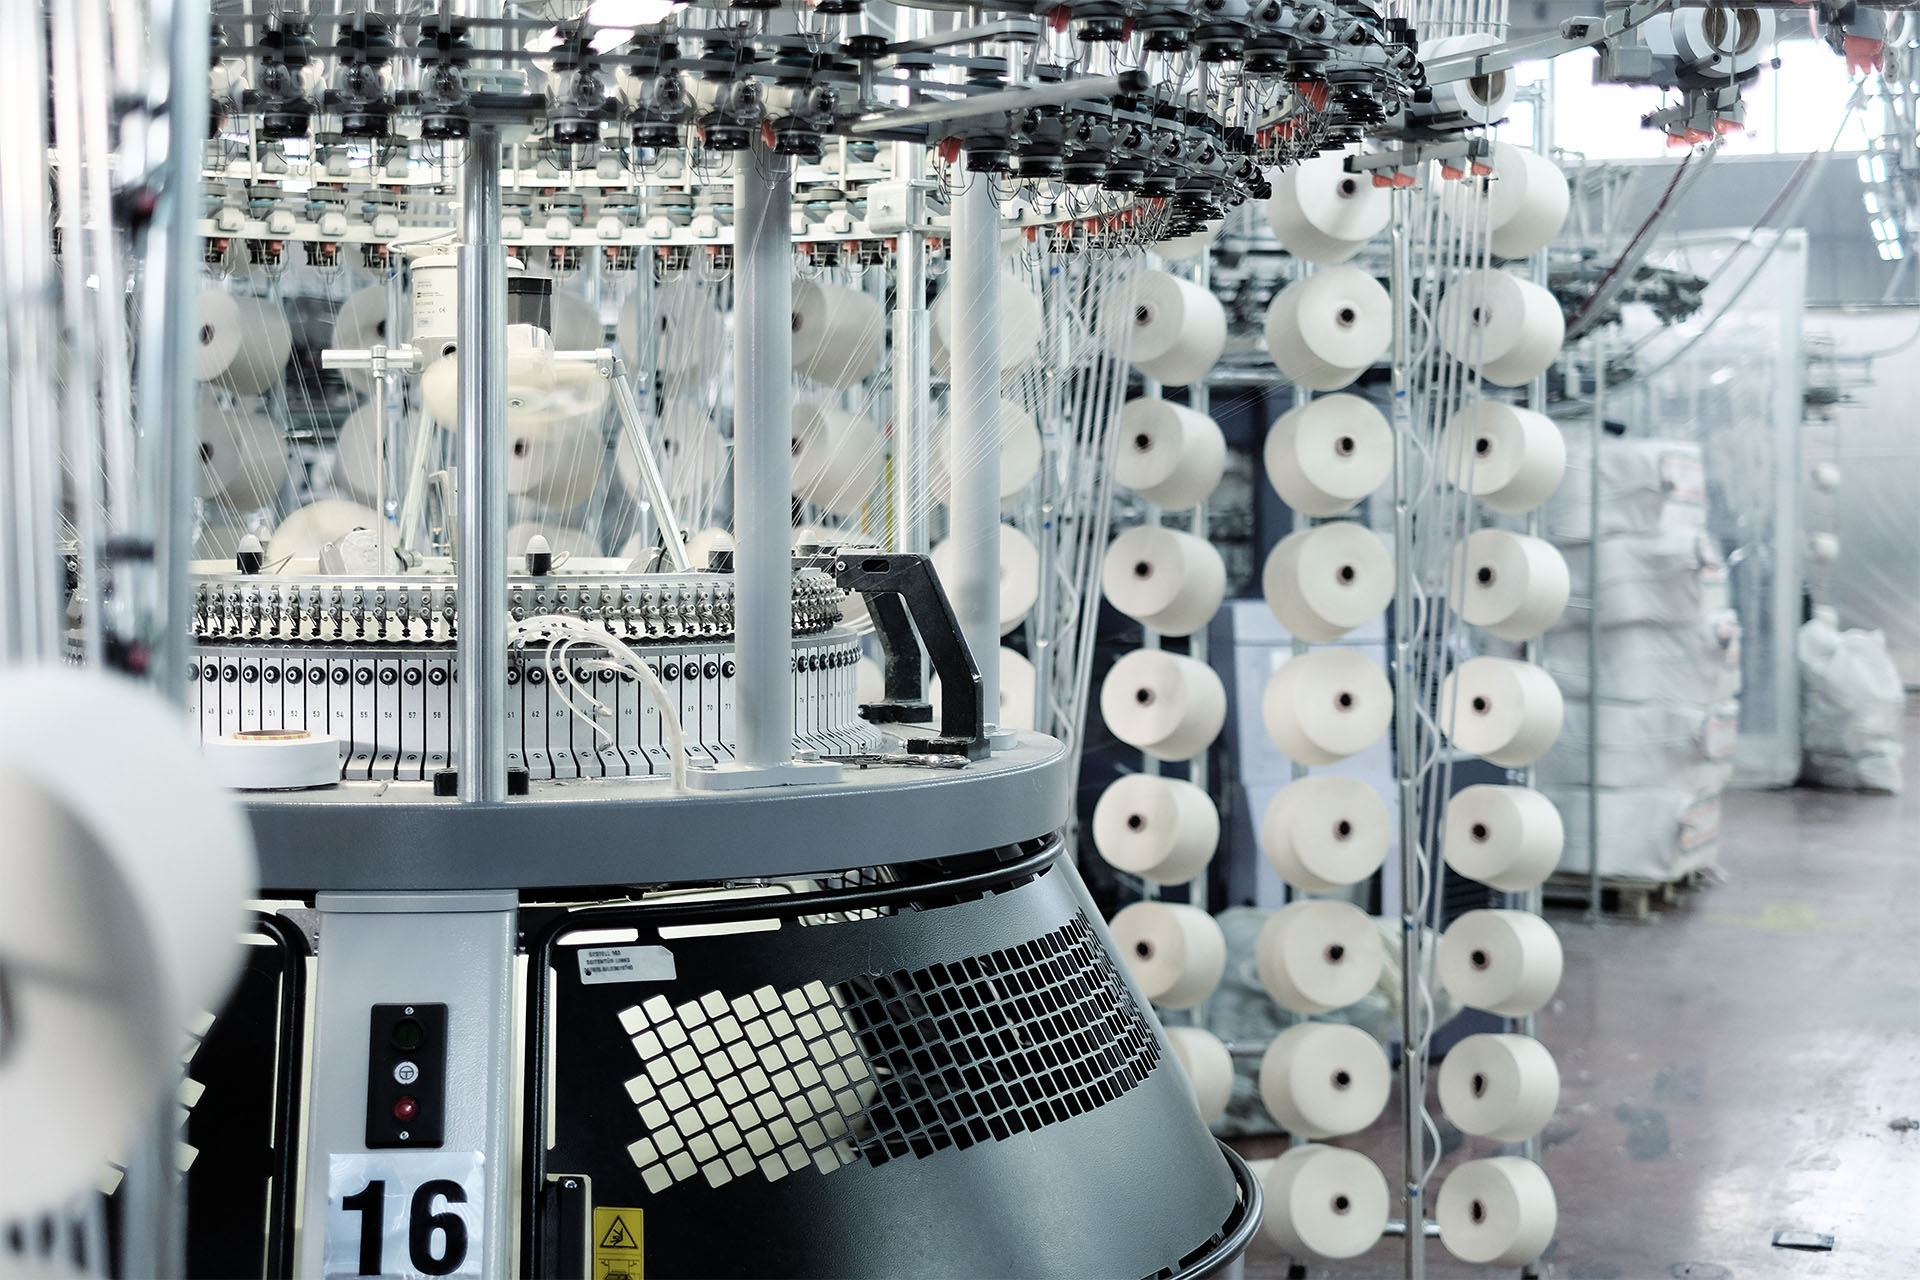 Circular and flatbed knitting machines in the textile industry.